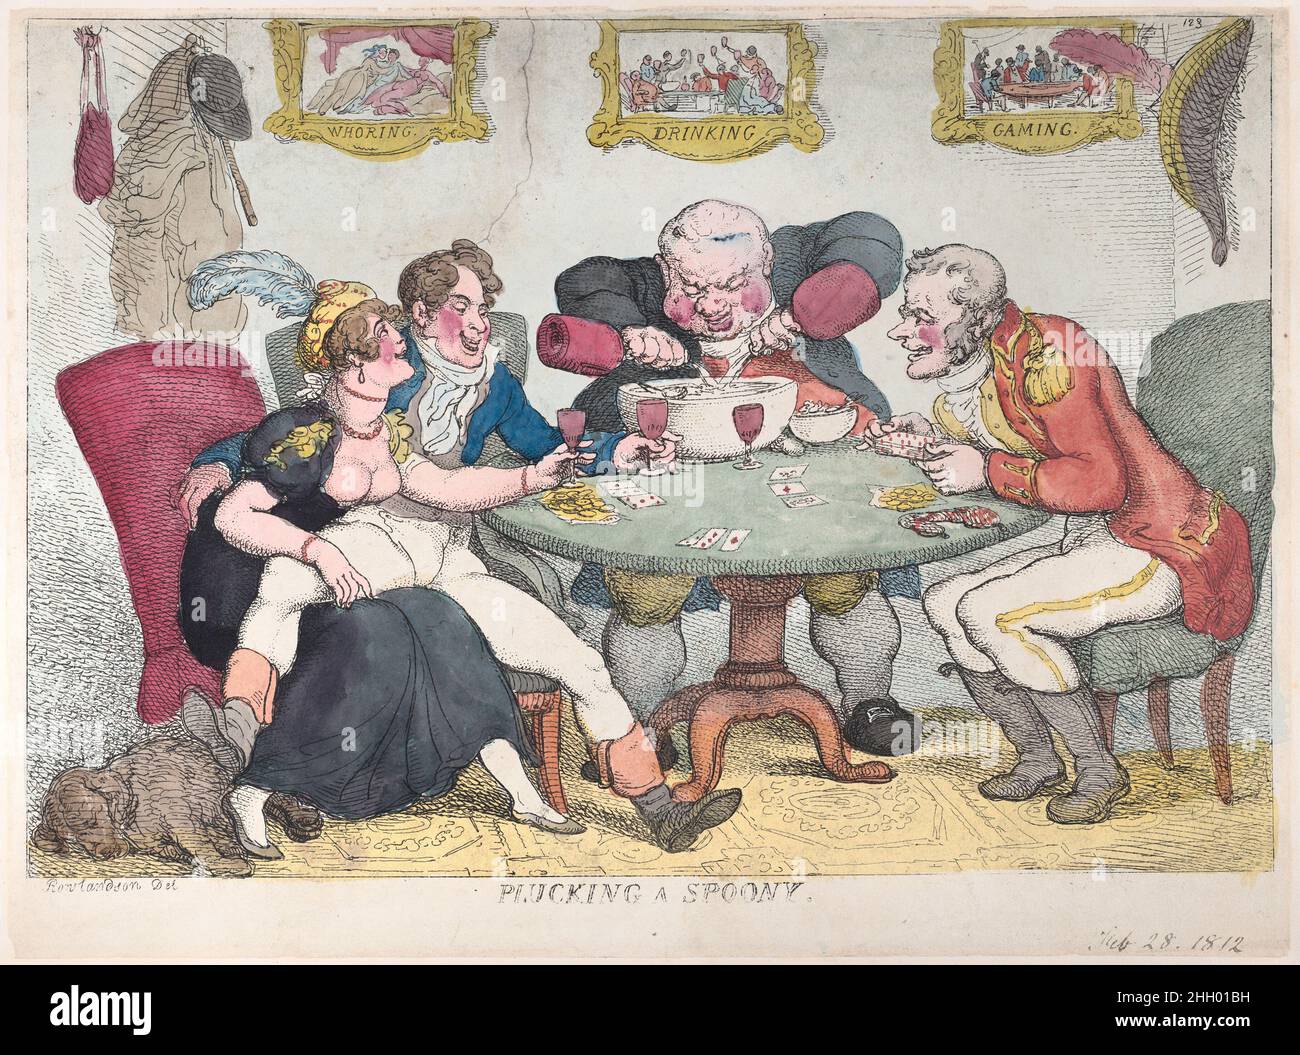 Plucking a Spoony February 28, 1812 Thomas Rowlandson A promising young 'spooney' seated at left, entering into life's dangers, represented by the framed pictures above inscribed 'Whoring,' 'Drinking,' and 'Gaming.' He sits with his legs across a woman at left. A man at center pours two bottles into a punch bowl, and a man at right deals cards.. Plucking a Spoony. Thomas Rowlandson (British, London 1757–1827 London). February 28, 1812. Hand-colored etching. Prints Stock Photo